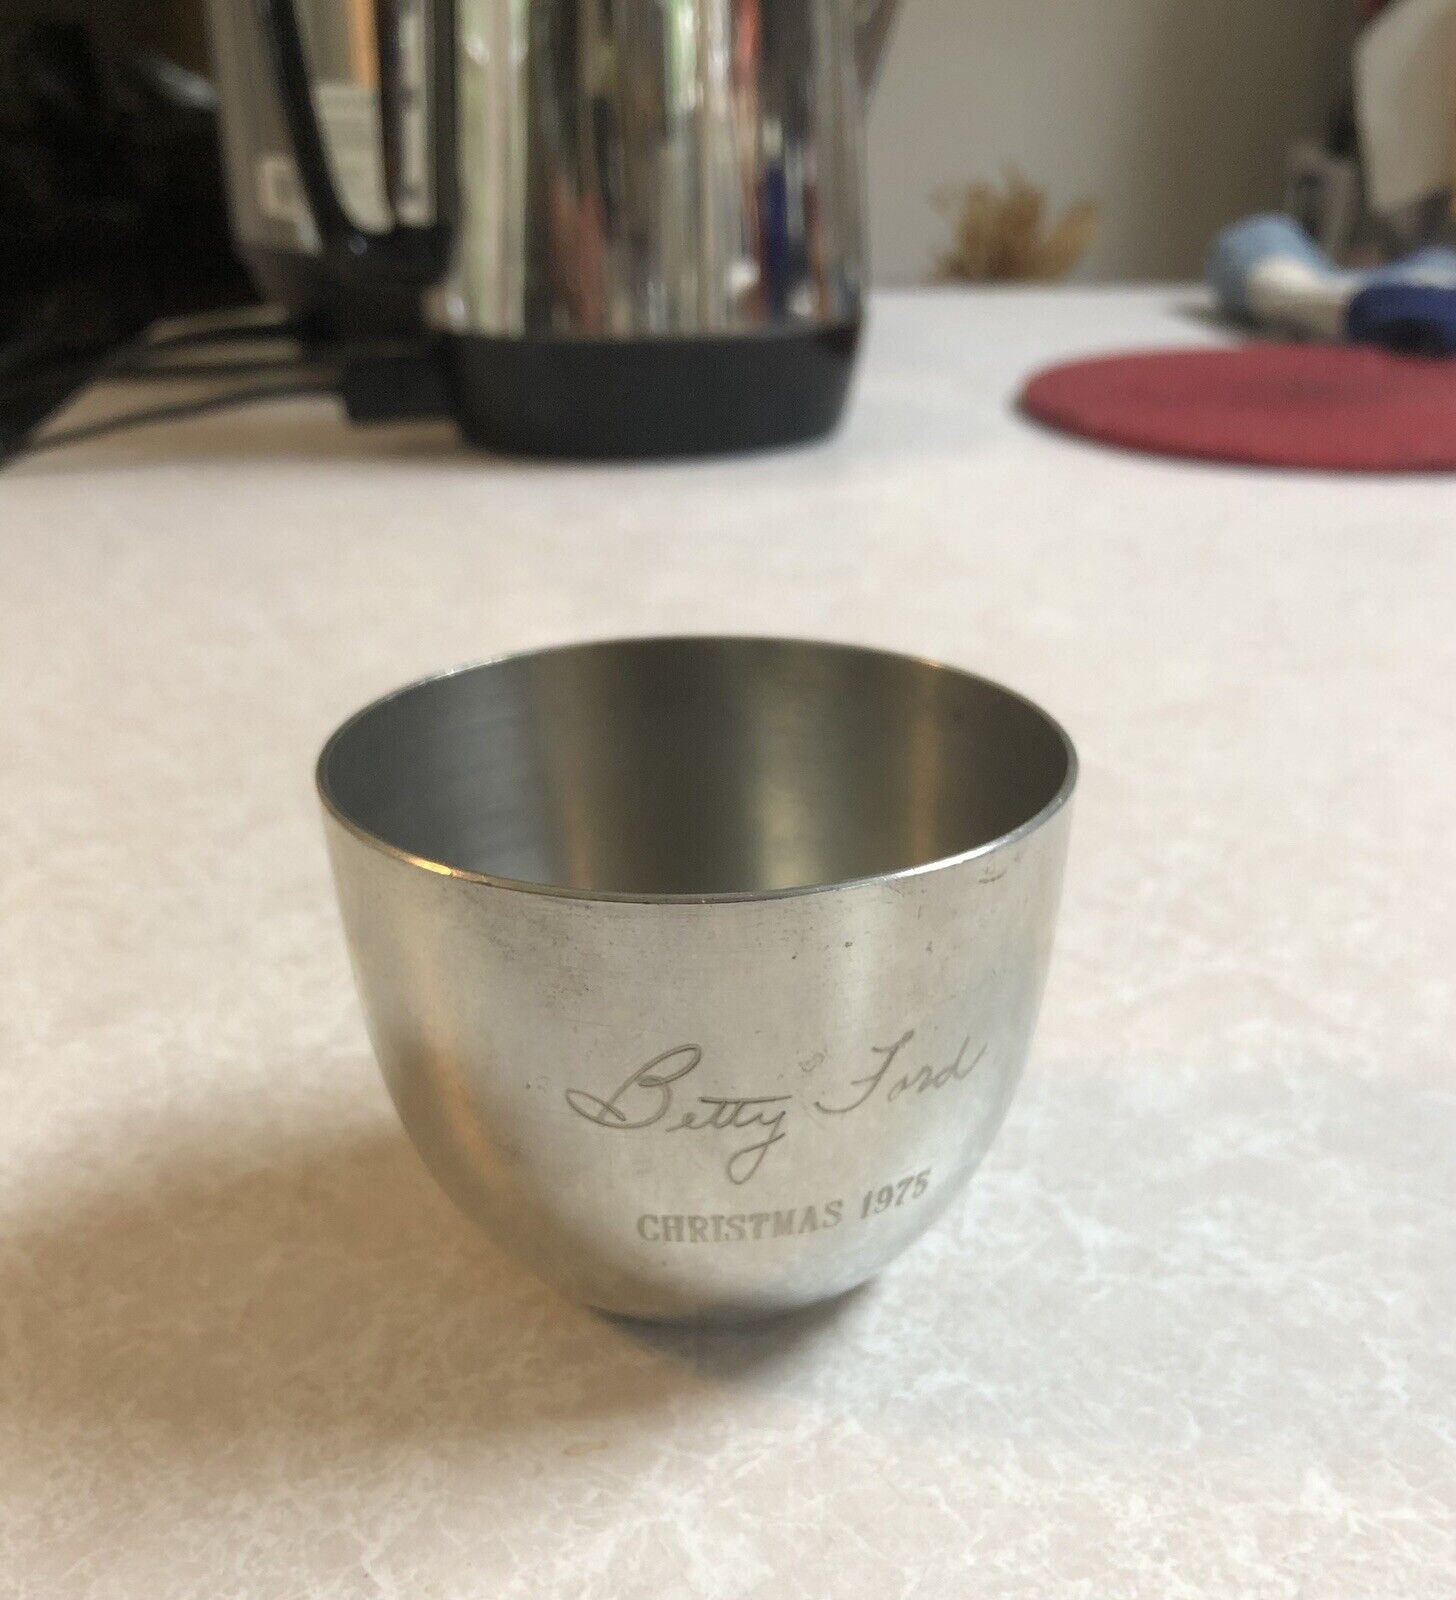 Rare Betty Ford Signed Stieff Pewter Jefferson Cup Christmas 1975.